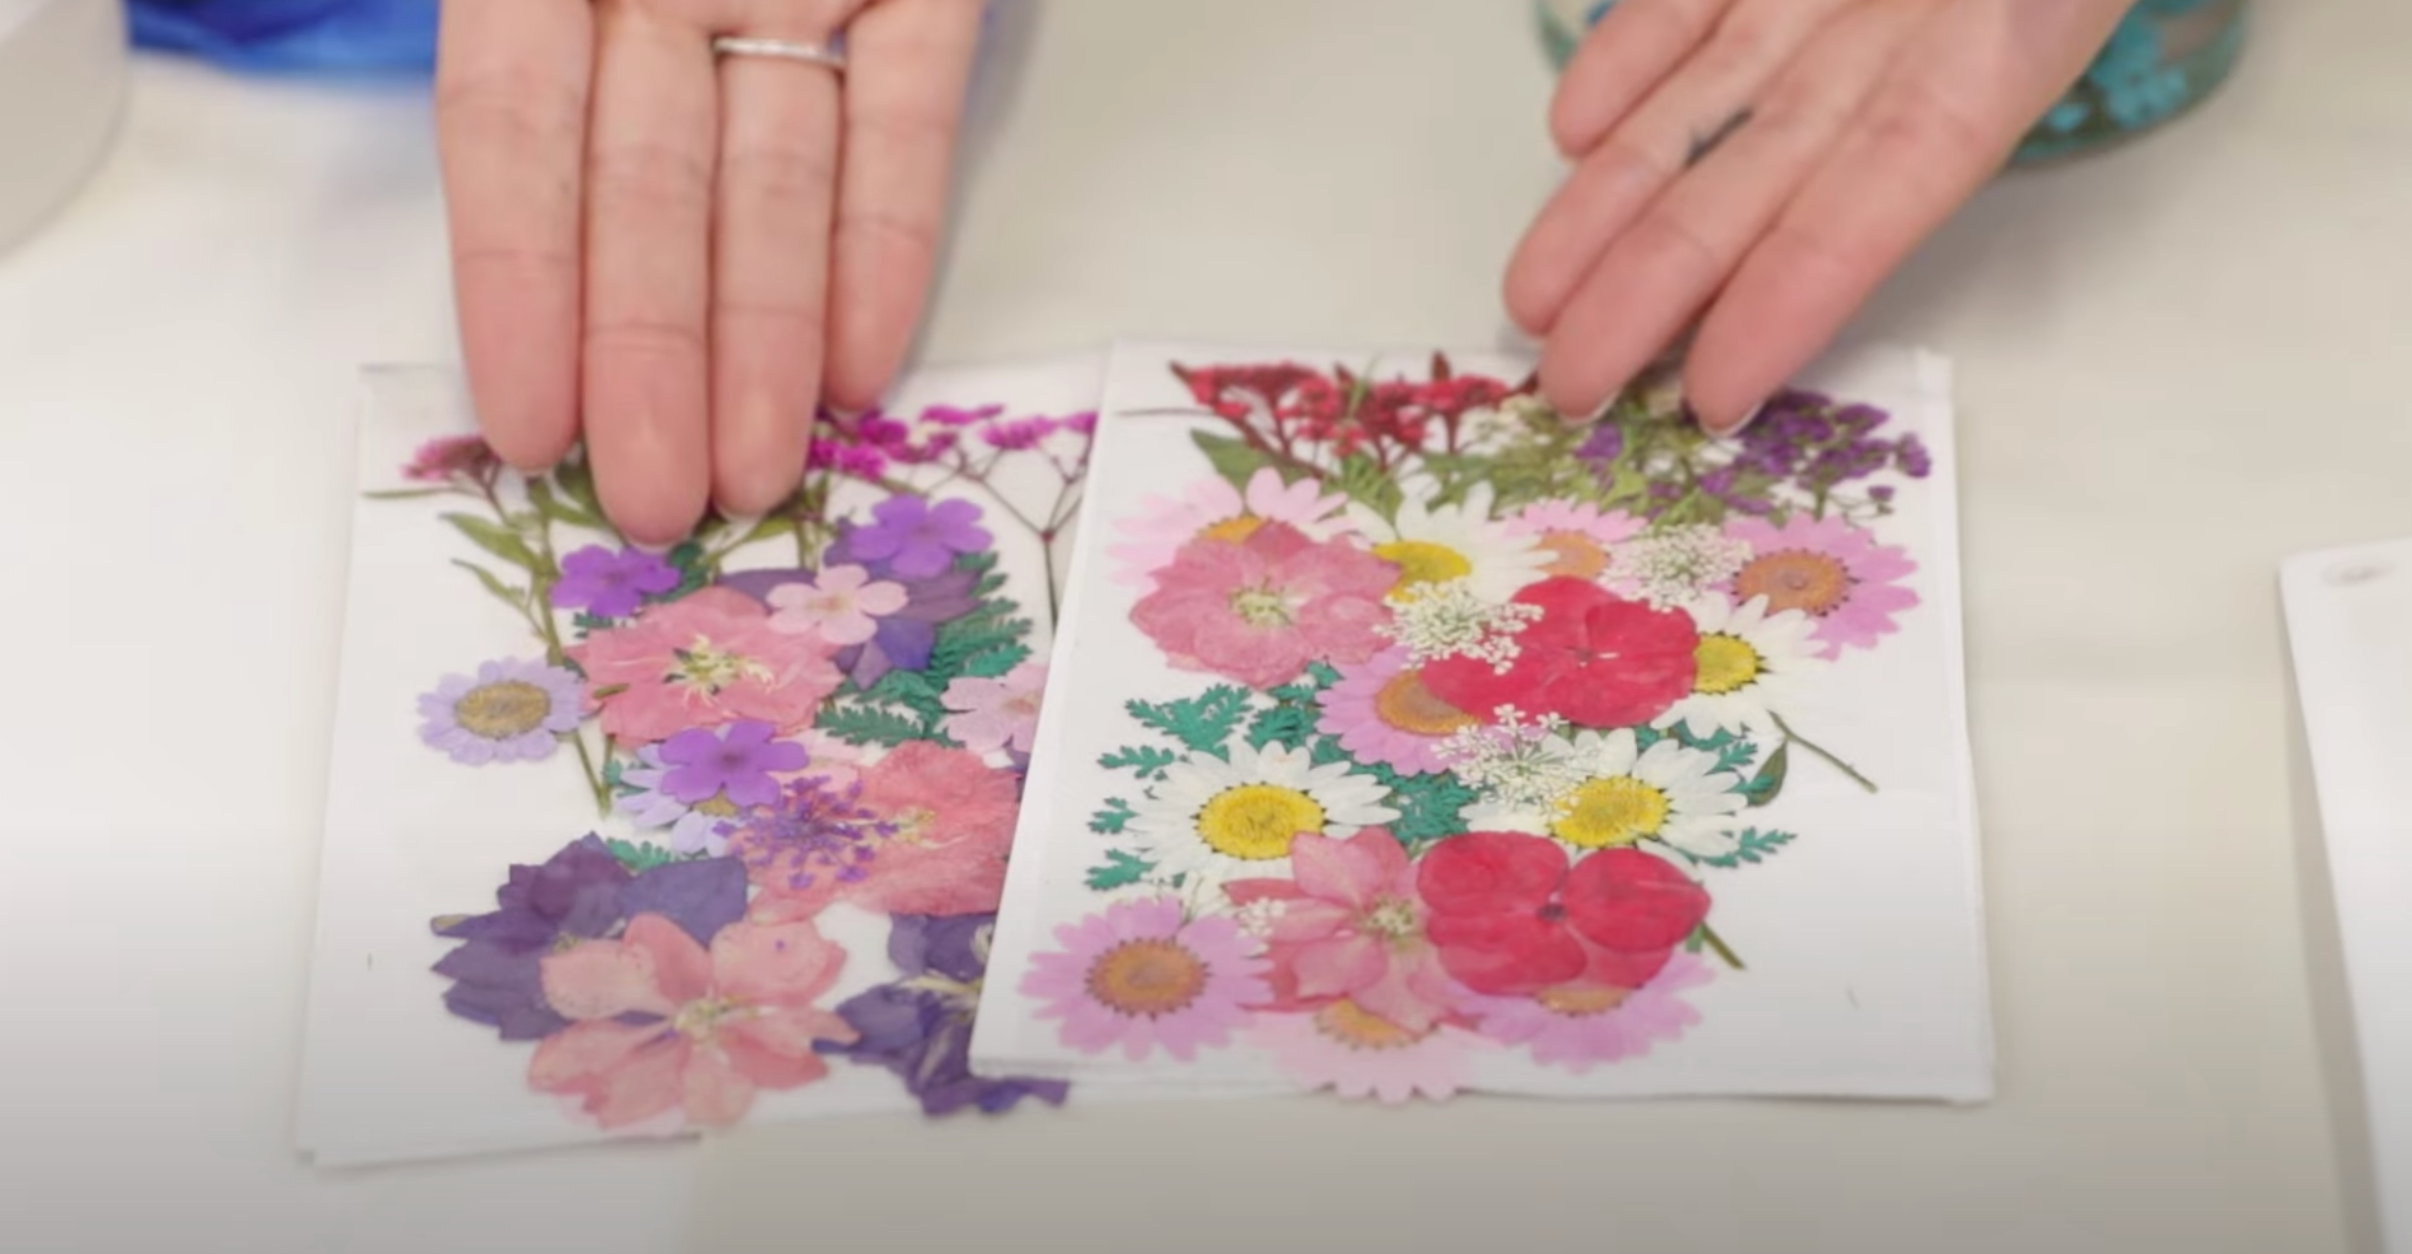 Epoxy Resin Flower Projects Perfect for Spring